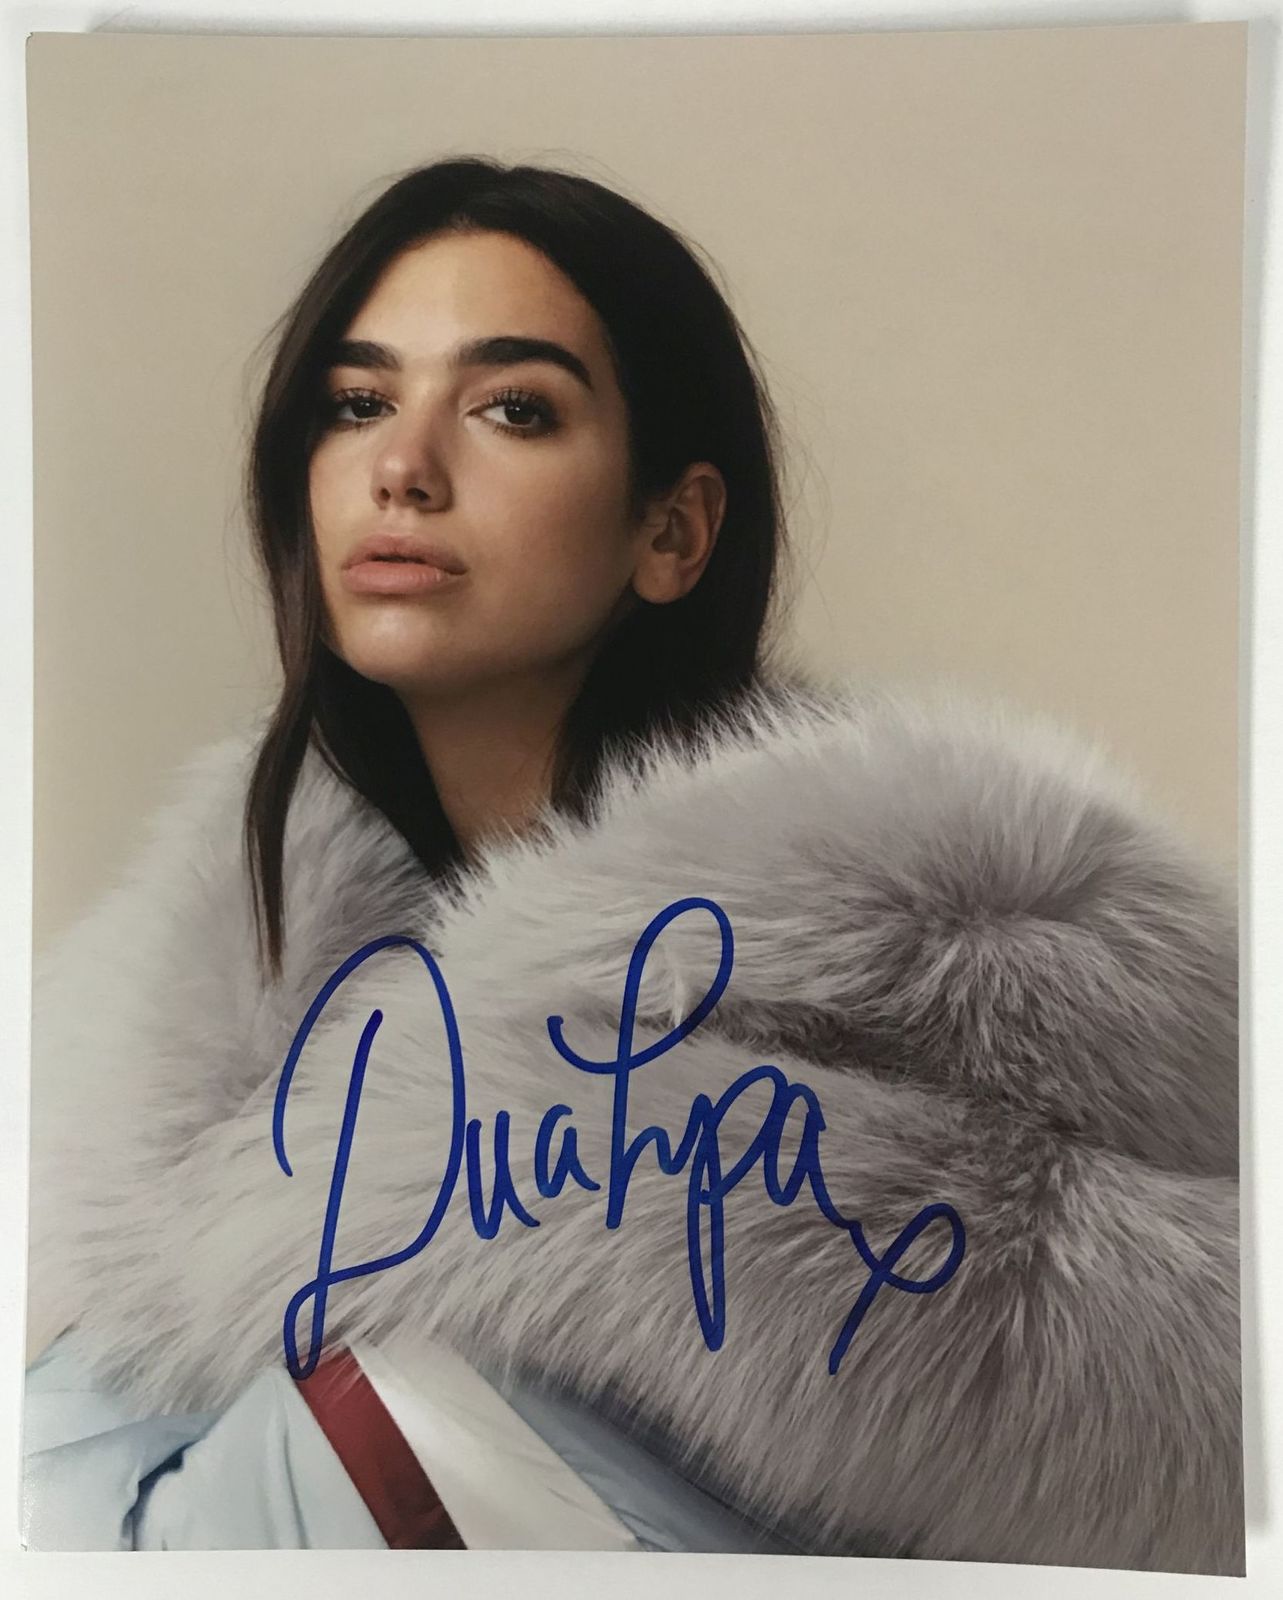 Primary image for Dua Lipa Signed Autographed Glossy 8x10 Photo #3